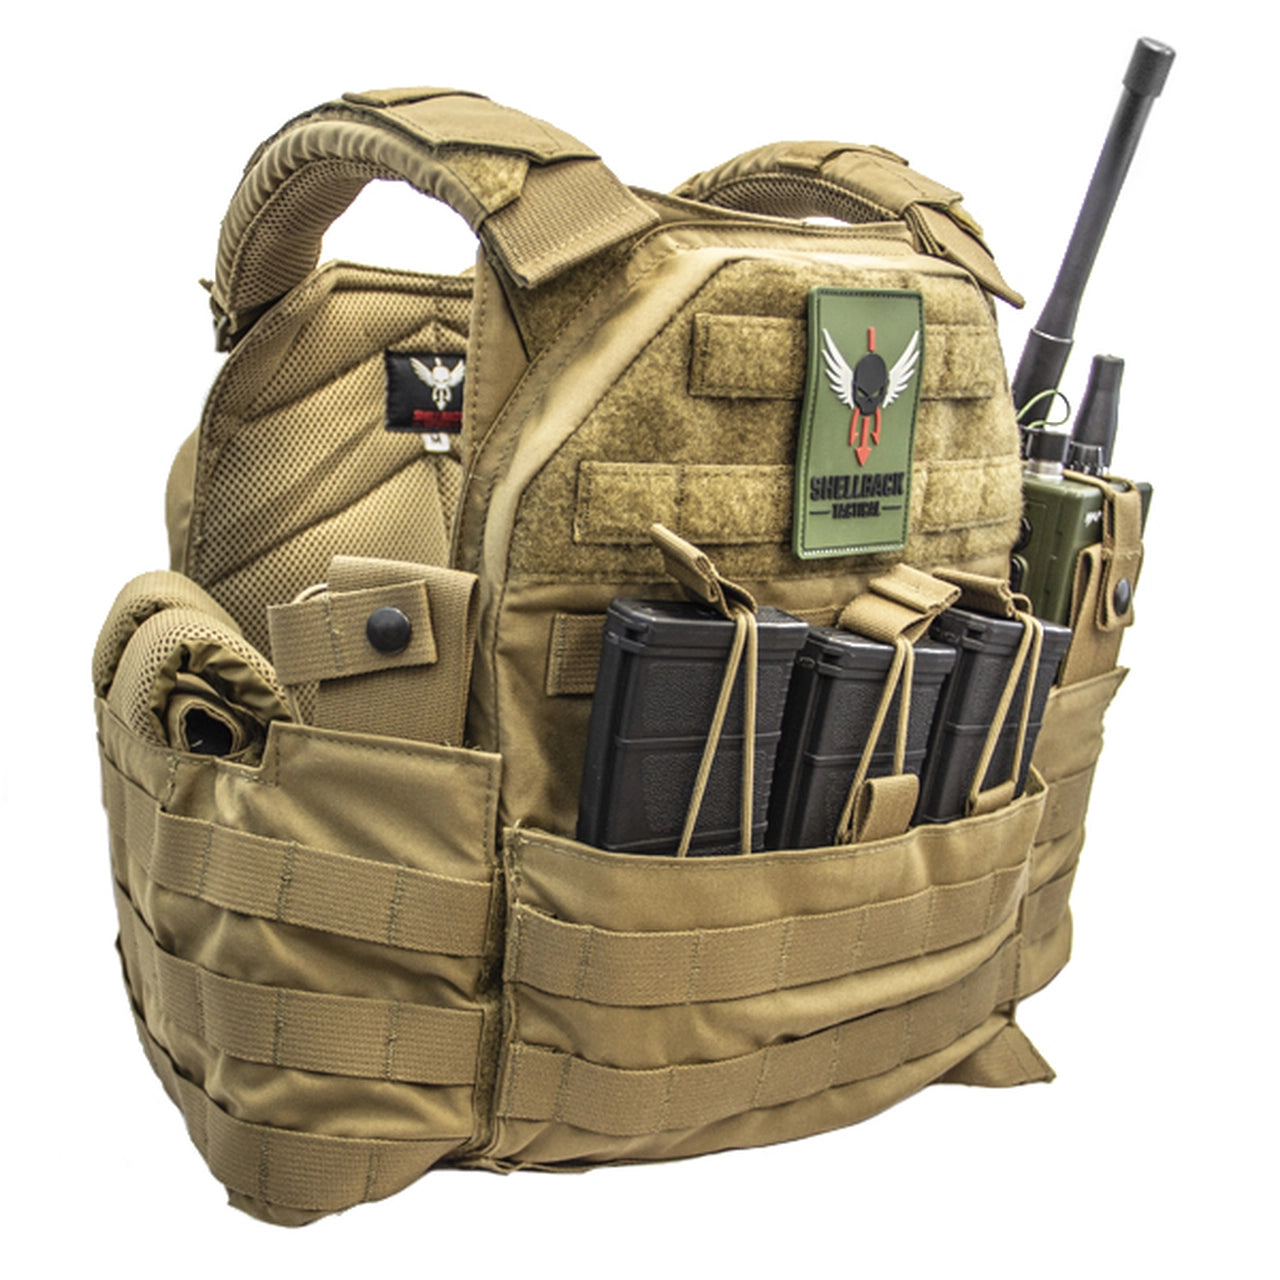 A modular and low profile plate carrier, the Shellback Tactical SF Plate Carrier by Shellback Tactical is combat ready with a radio attachment.